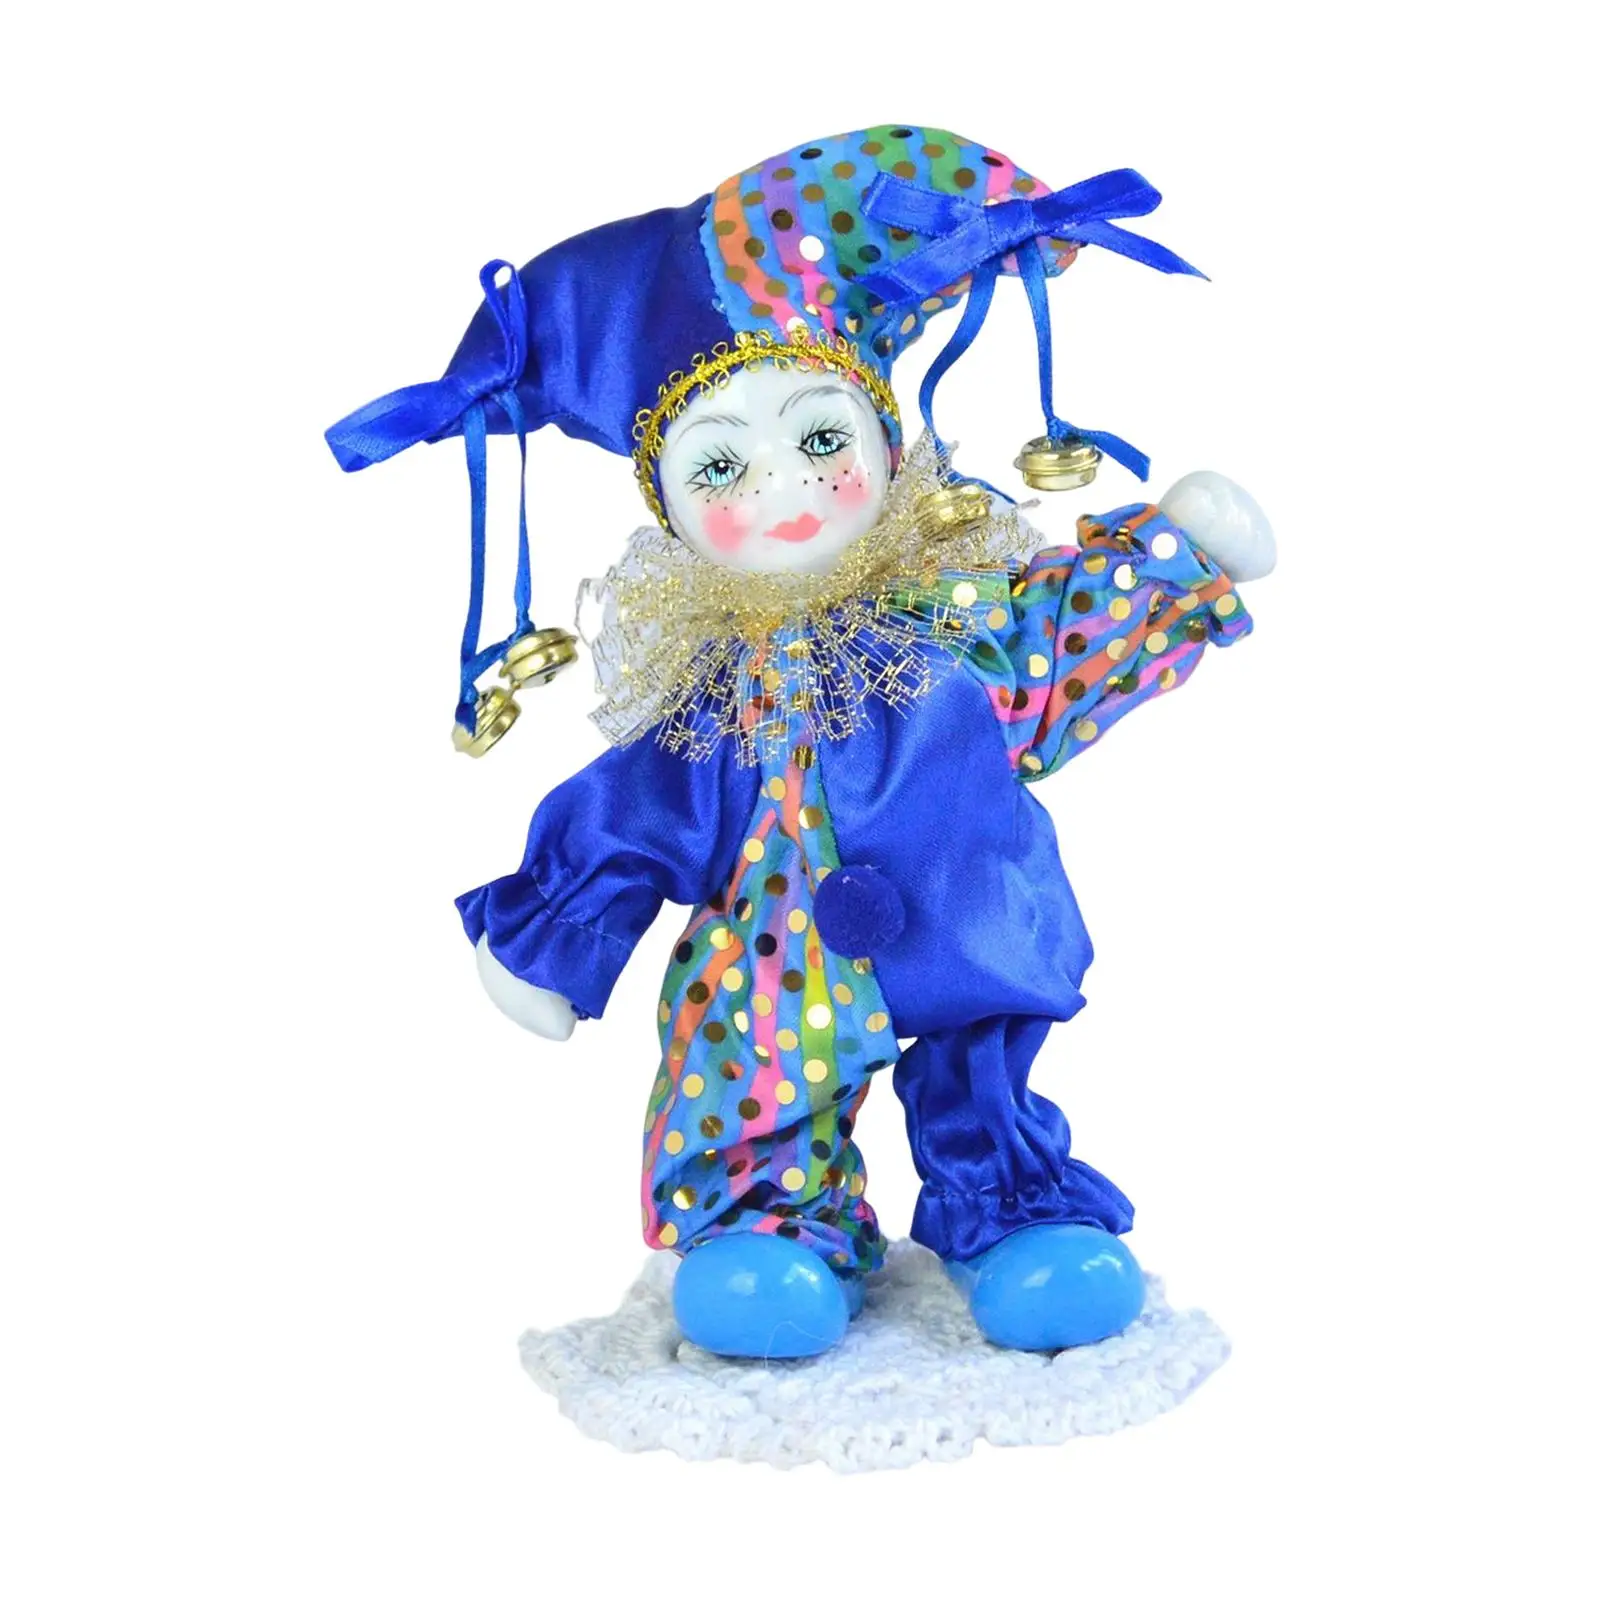 18cm Tall Clown Doll Figurine Arts Crafts Angle Model for Souvenirs Holiday